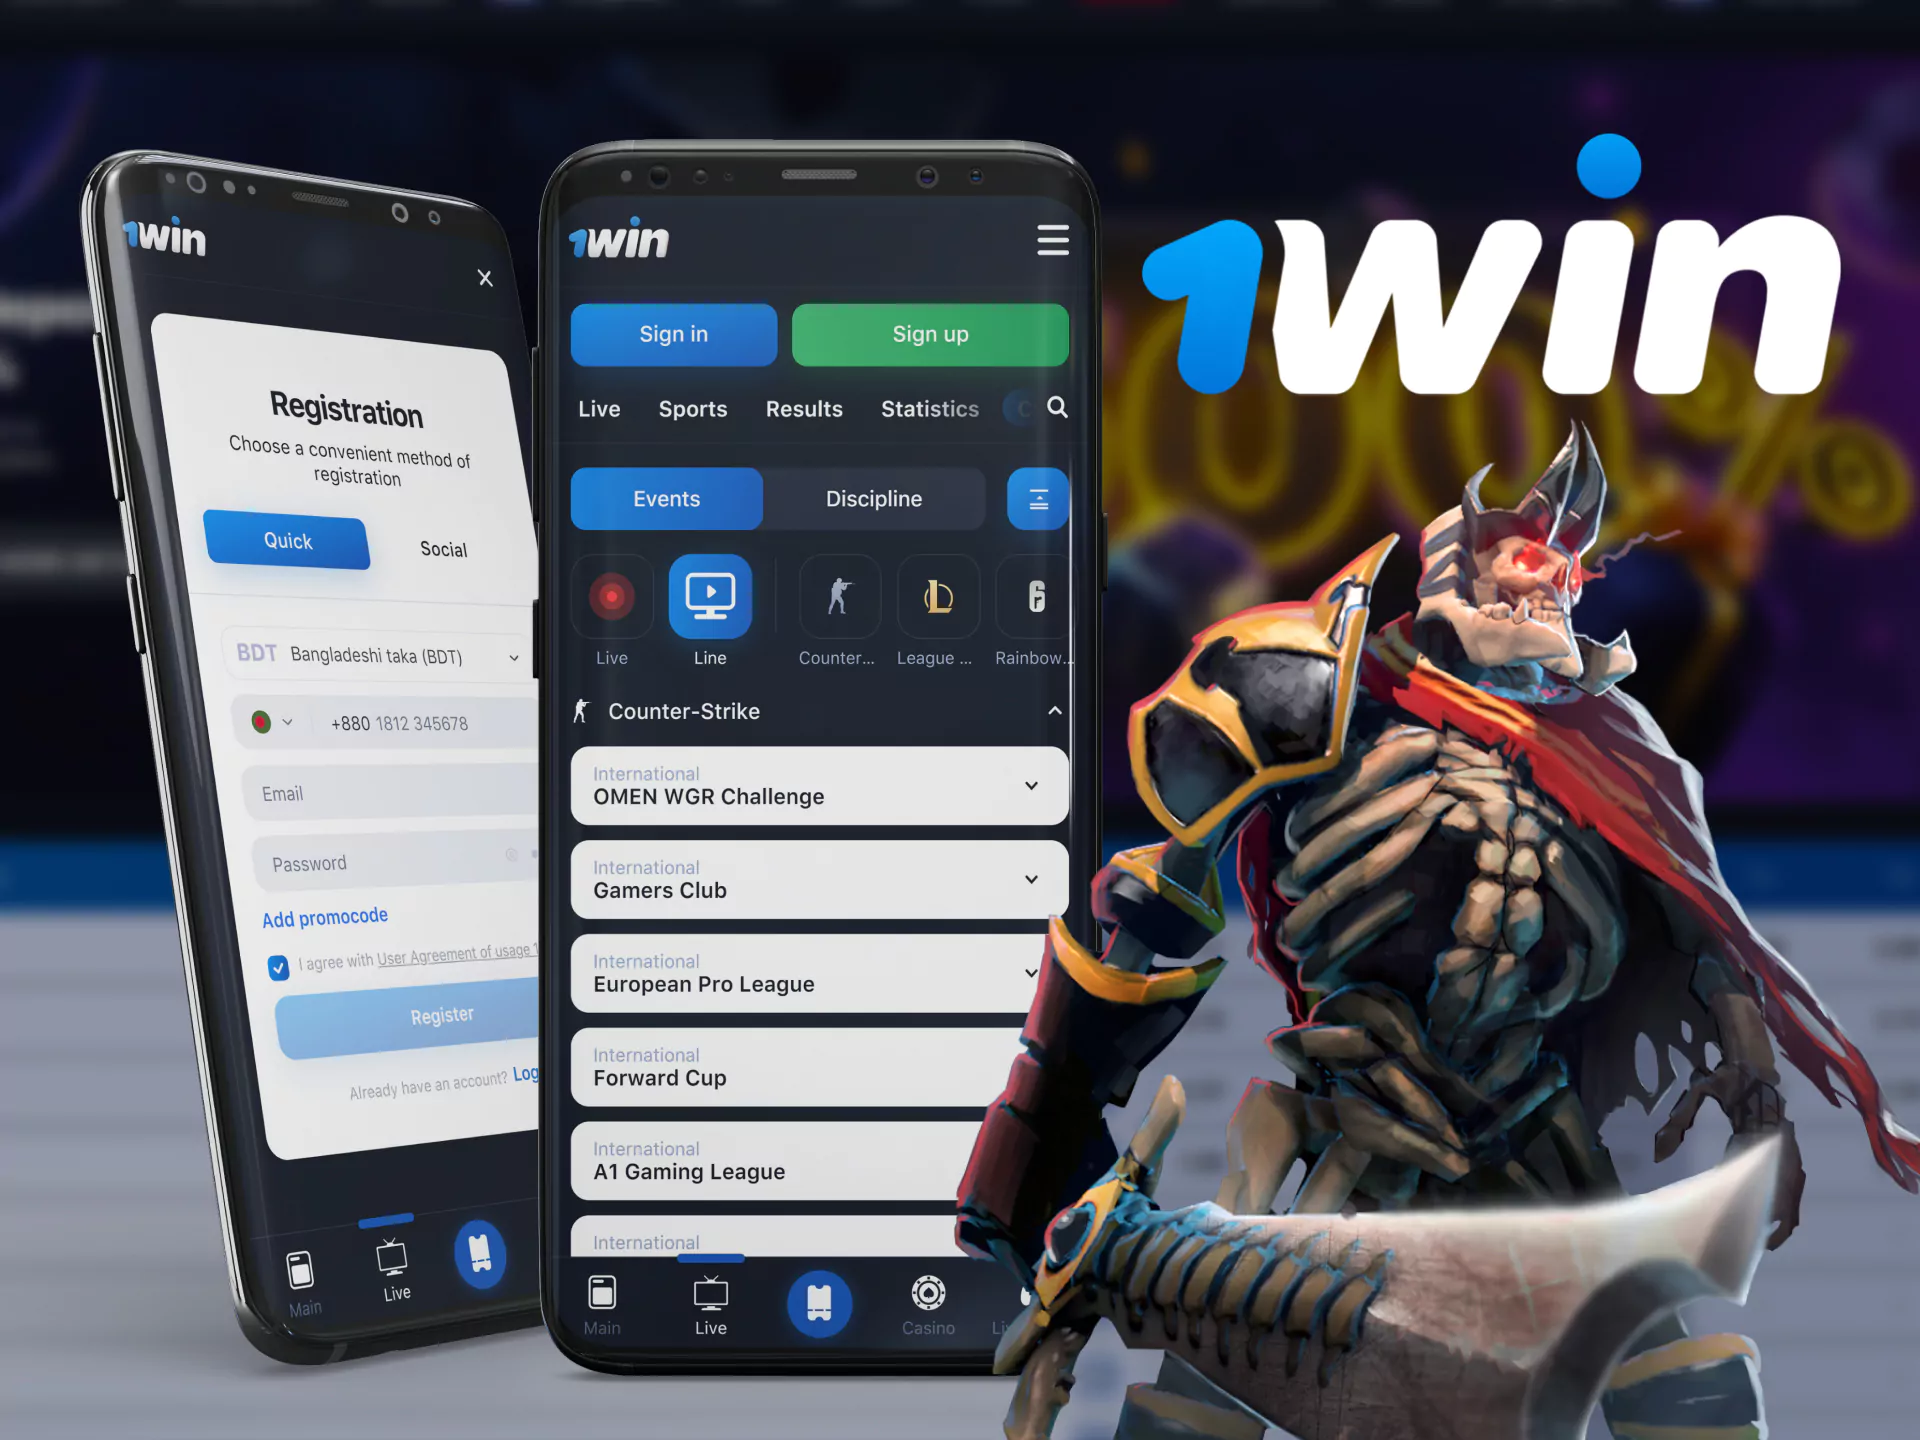 On 1Win, you can bet on esports directly in the mobile app.